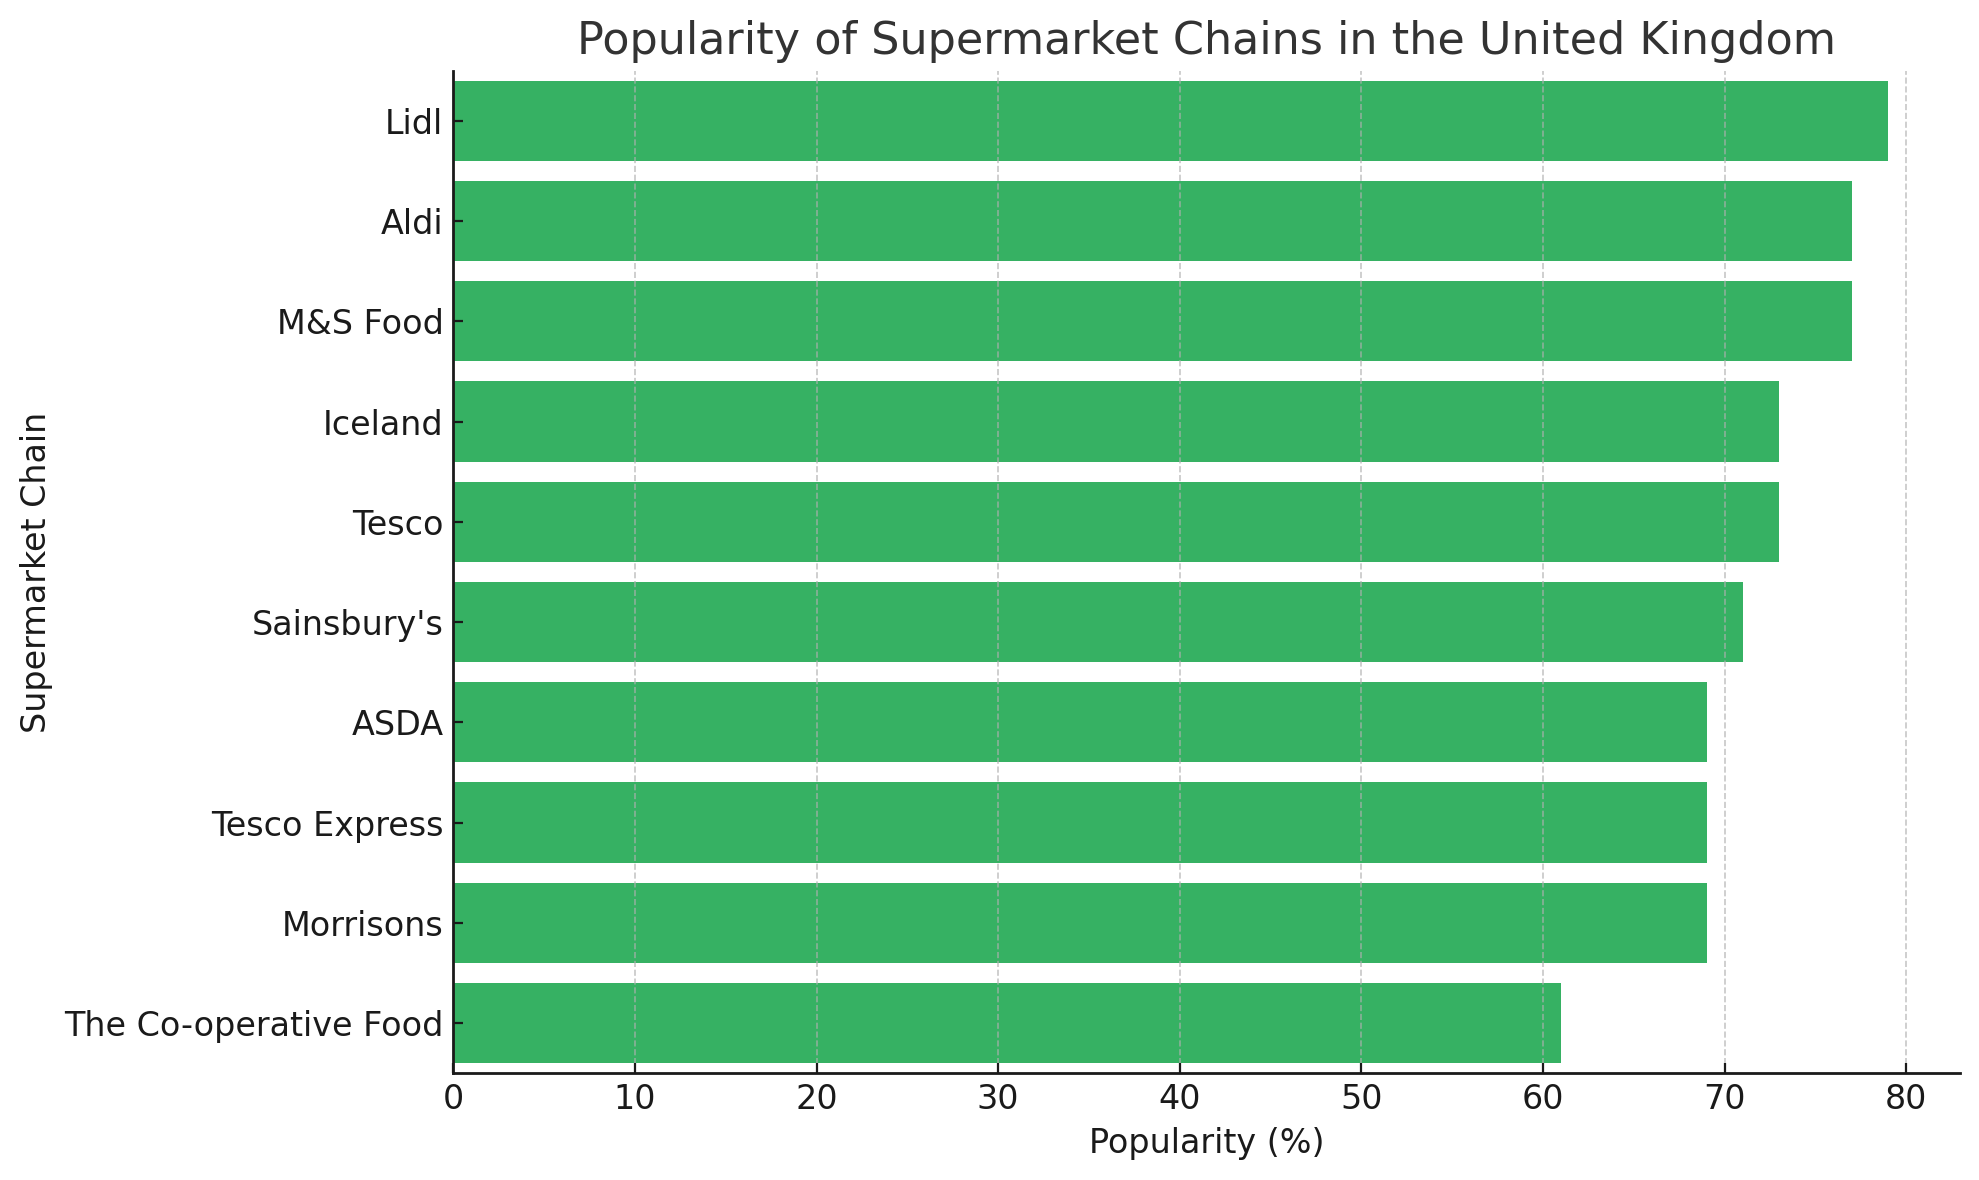 Popularity of Supermarket Chains in the United Kingdom